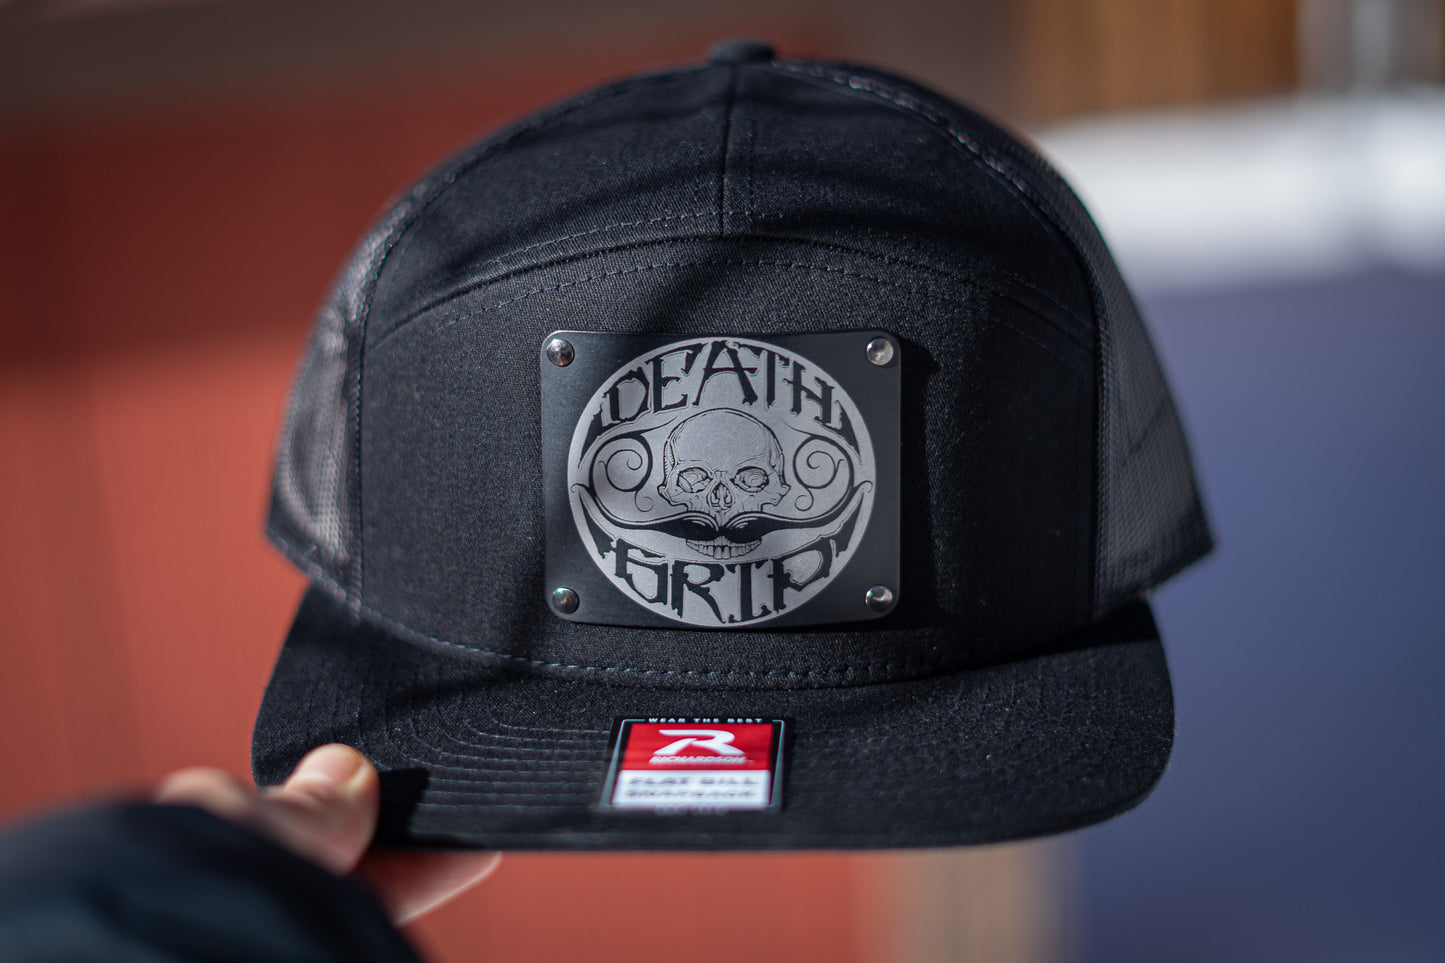 Limited Edition Platinum Patch Death Grip Hat (Buy One Get Free Bumper Sticker While Supplies Last)